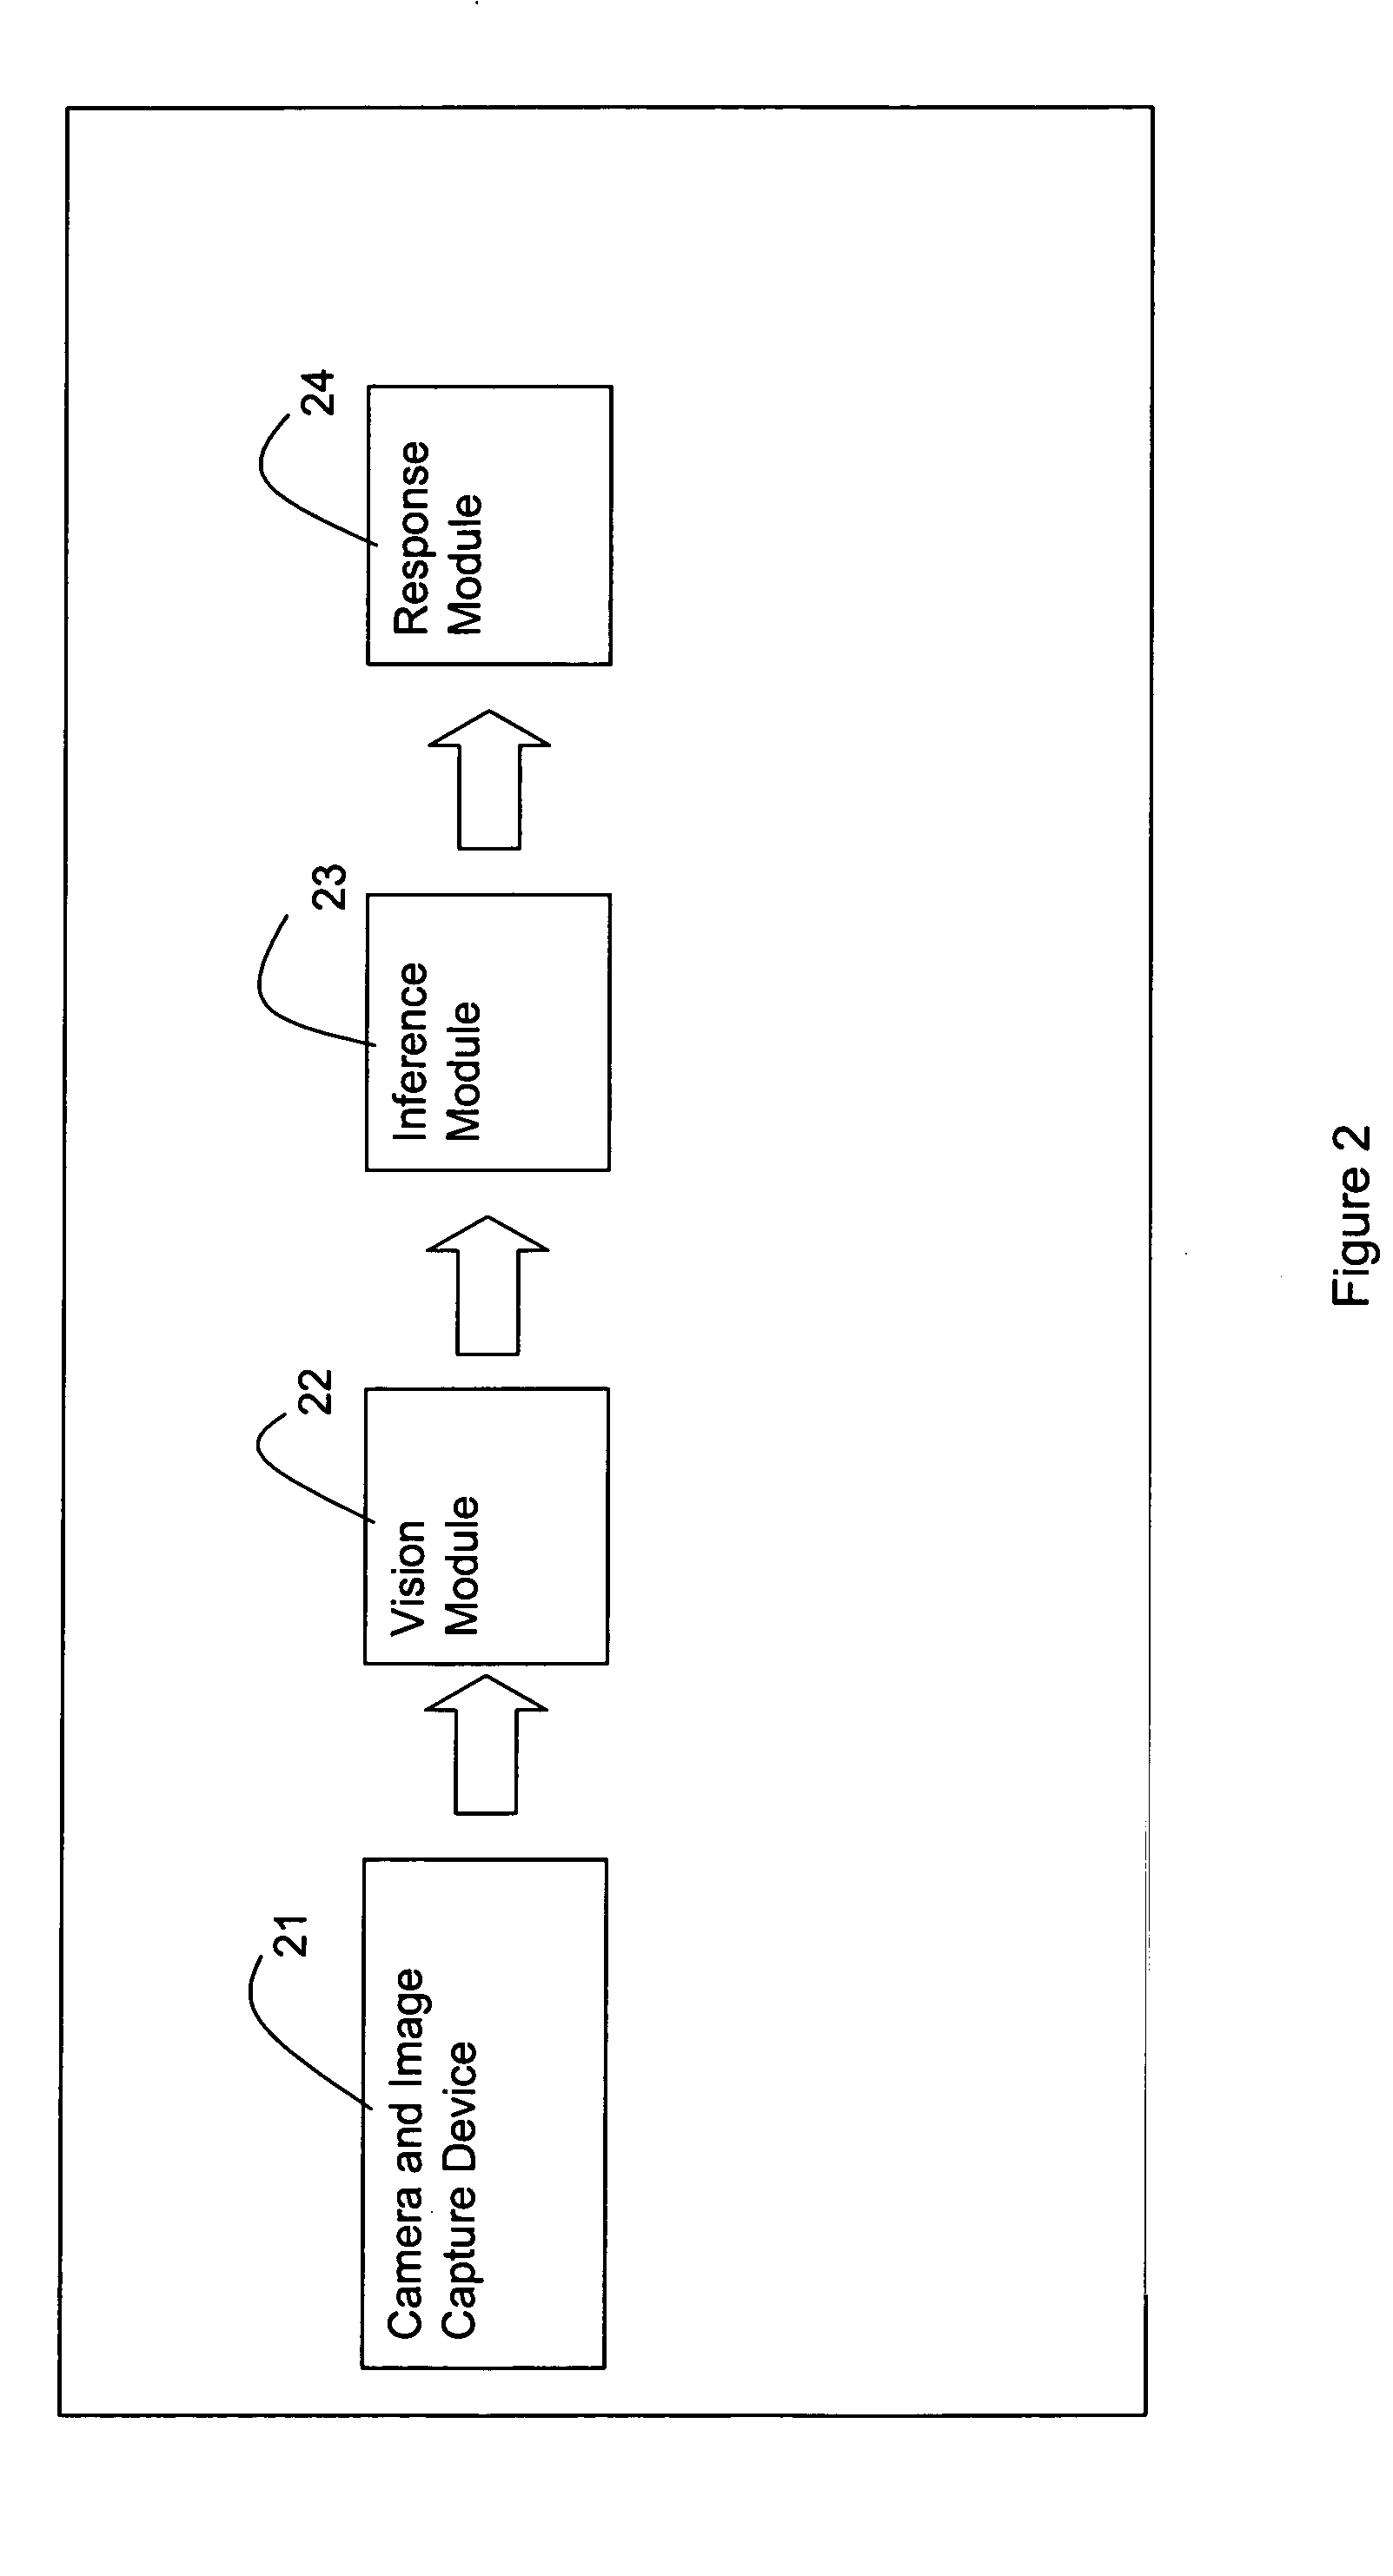 Active camera video-based surveillance systems and methods